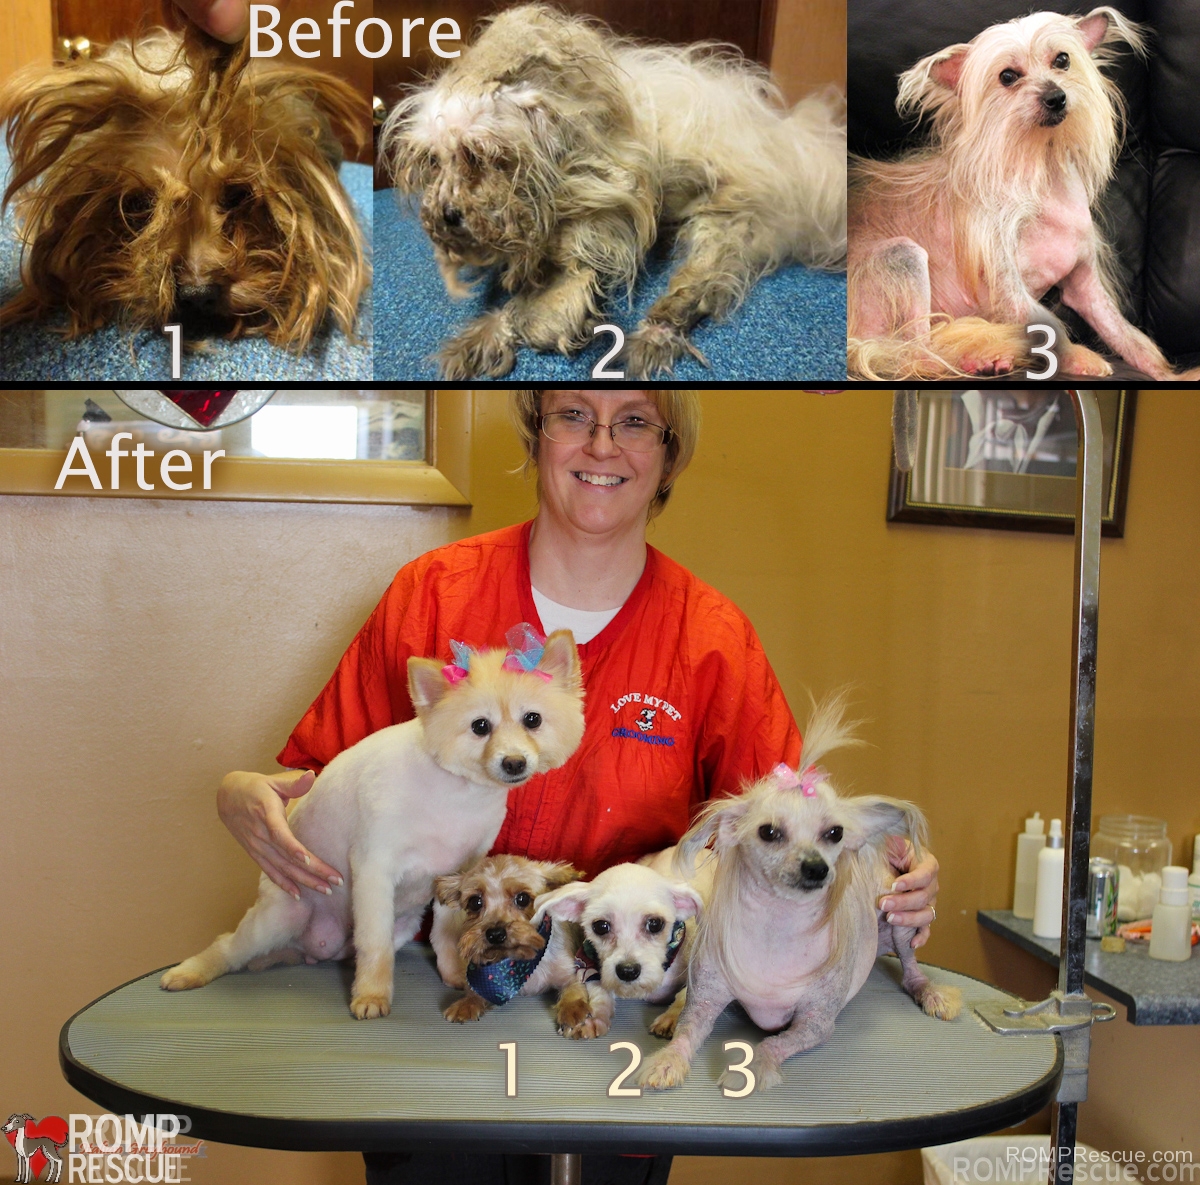 rescue, before after, before and after, dog rescue, dog, dogs, rescue, rescue, shelter, shelters, volunteer, groomer, miracle, cleaned up, maltese, yorkie, matted, badly matted, help